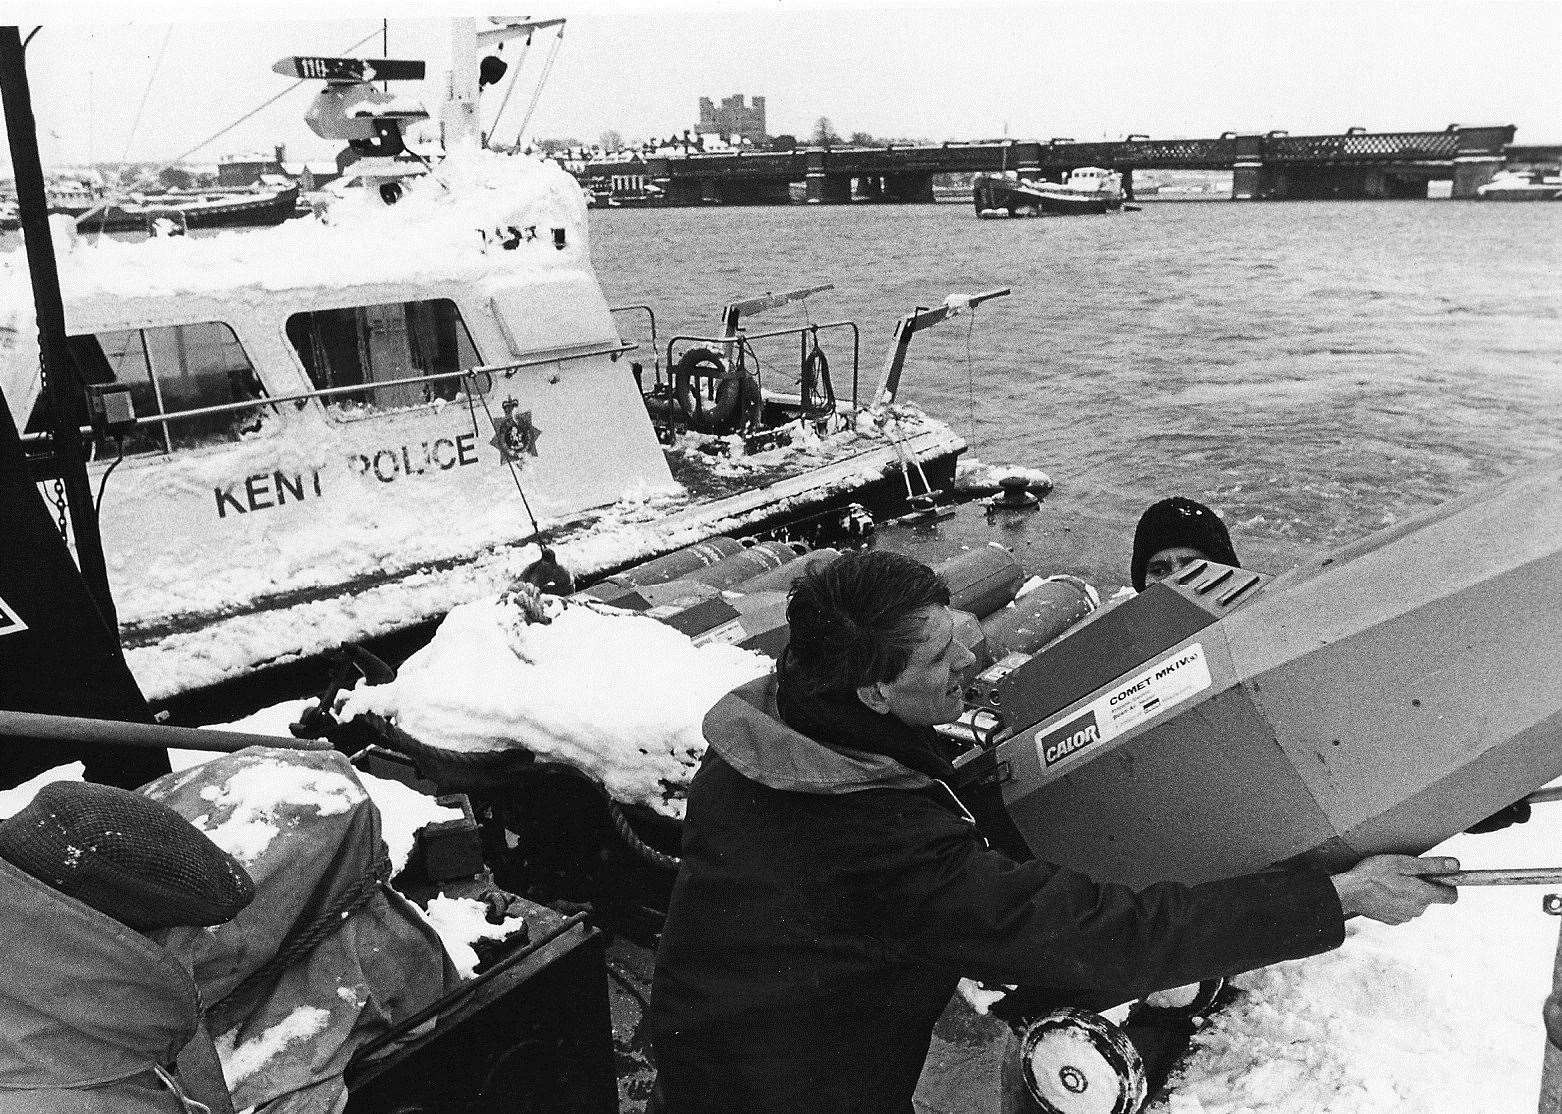 The Isle of Grain was cut off and the only means of access was by water. Here, a police boat is loaded with a portable gas heater for the Kent Oil Refinery which was desperately in need of warmth to stop essential equipment from freezing solid. Picture: Brian Weeden